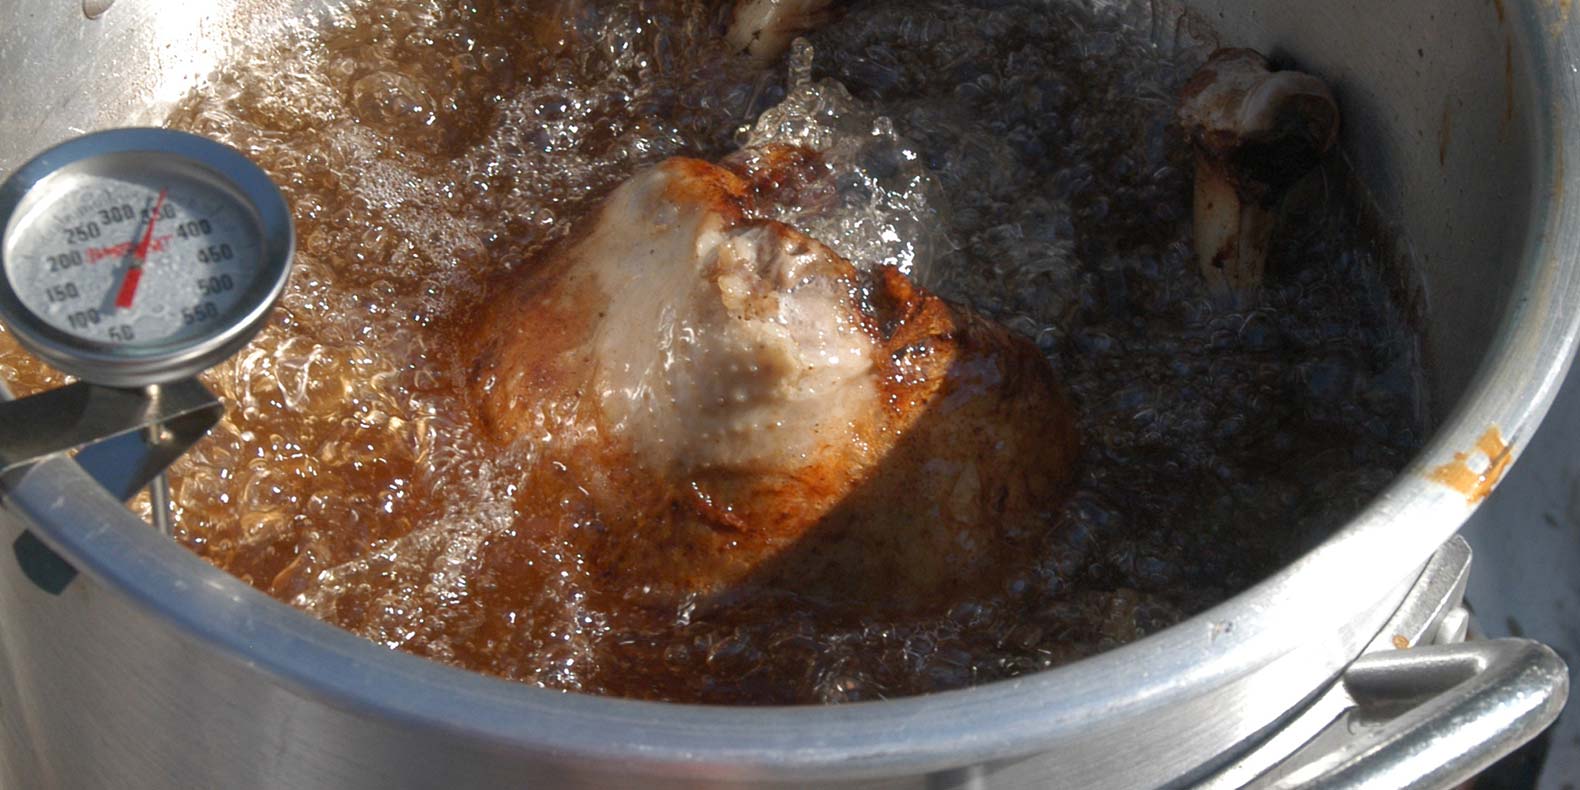 How To Safely Deep Fry a Turkey This Thanksgiving